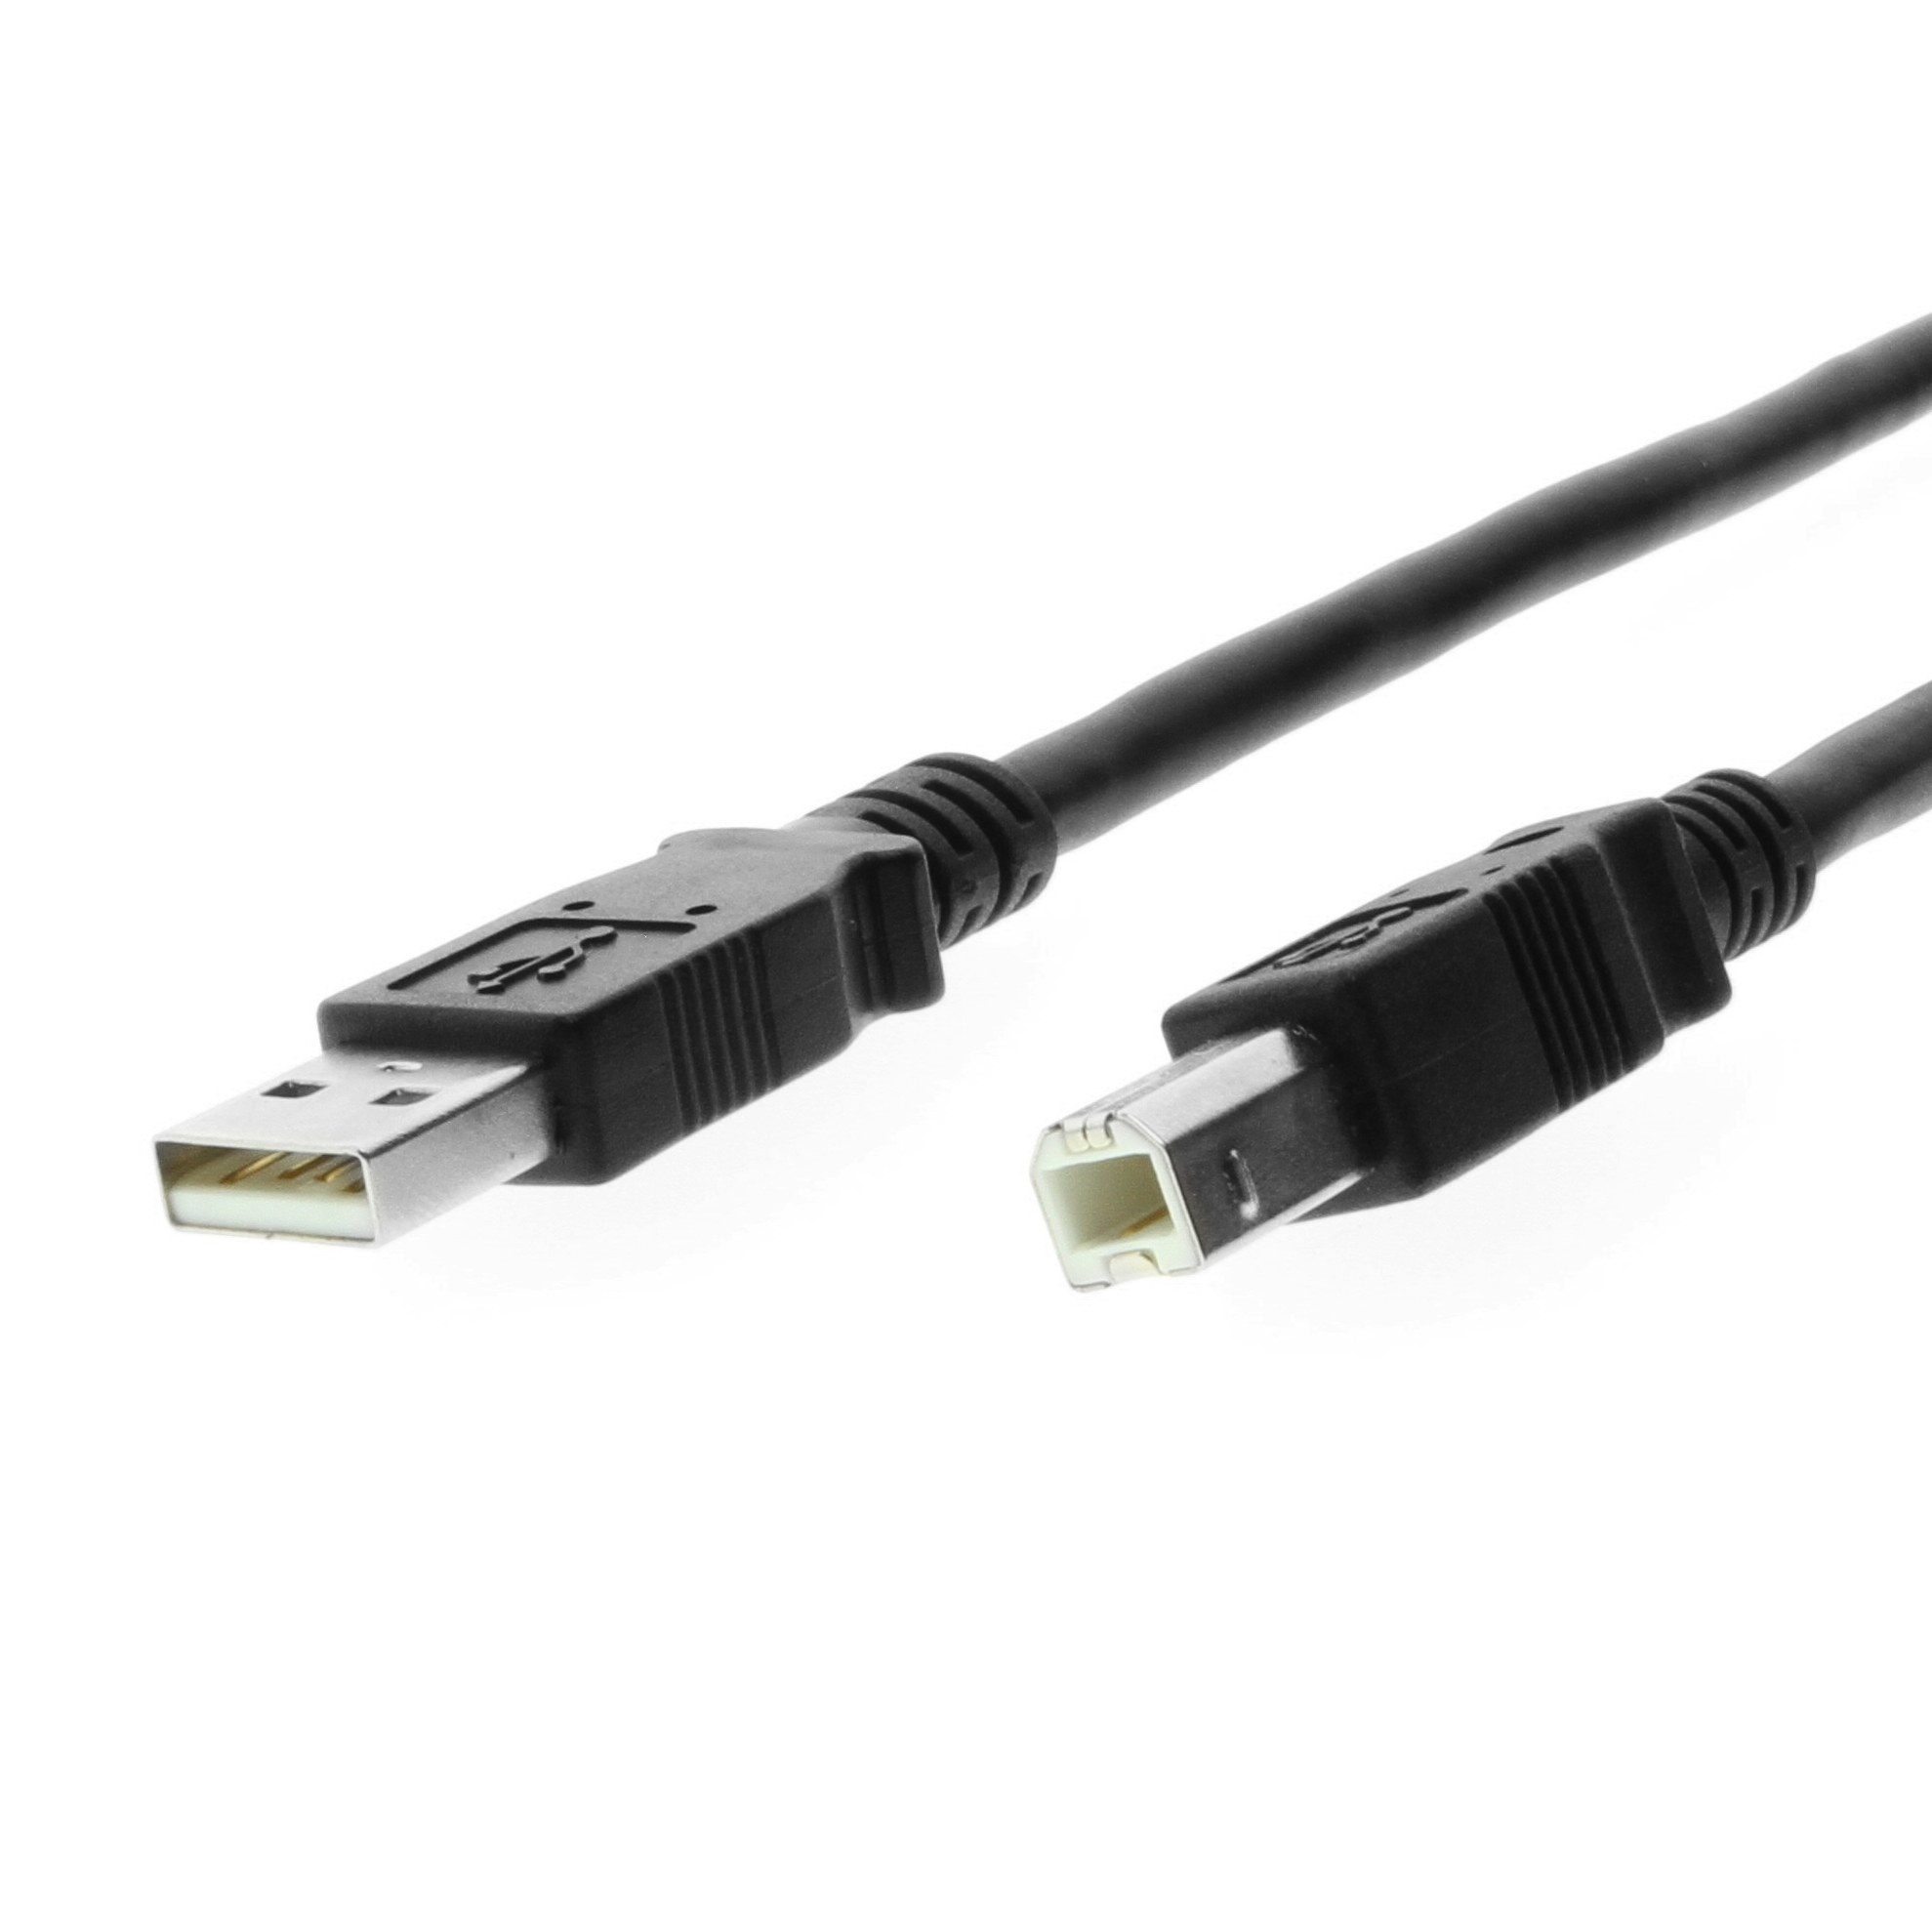 yanw USB 2.0 A-A Data Cable Male to Male Cord 3 M 10 Ft Wire 